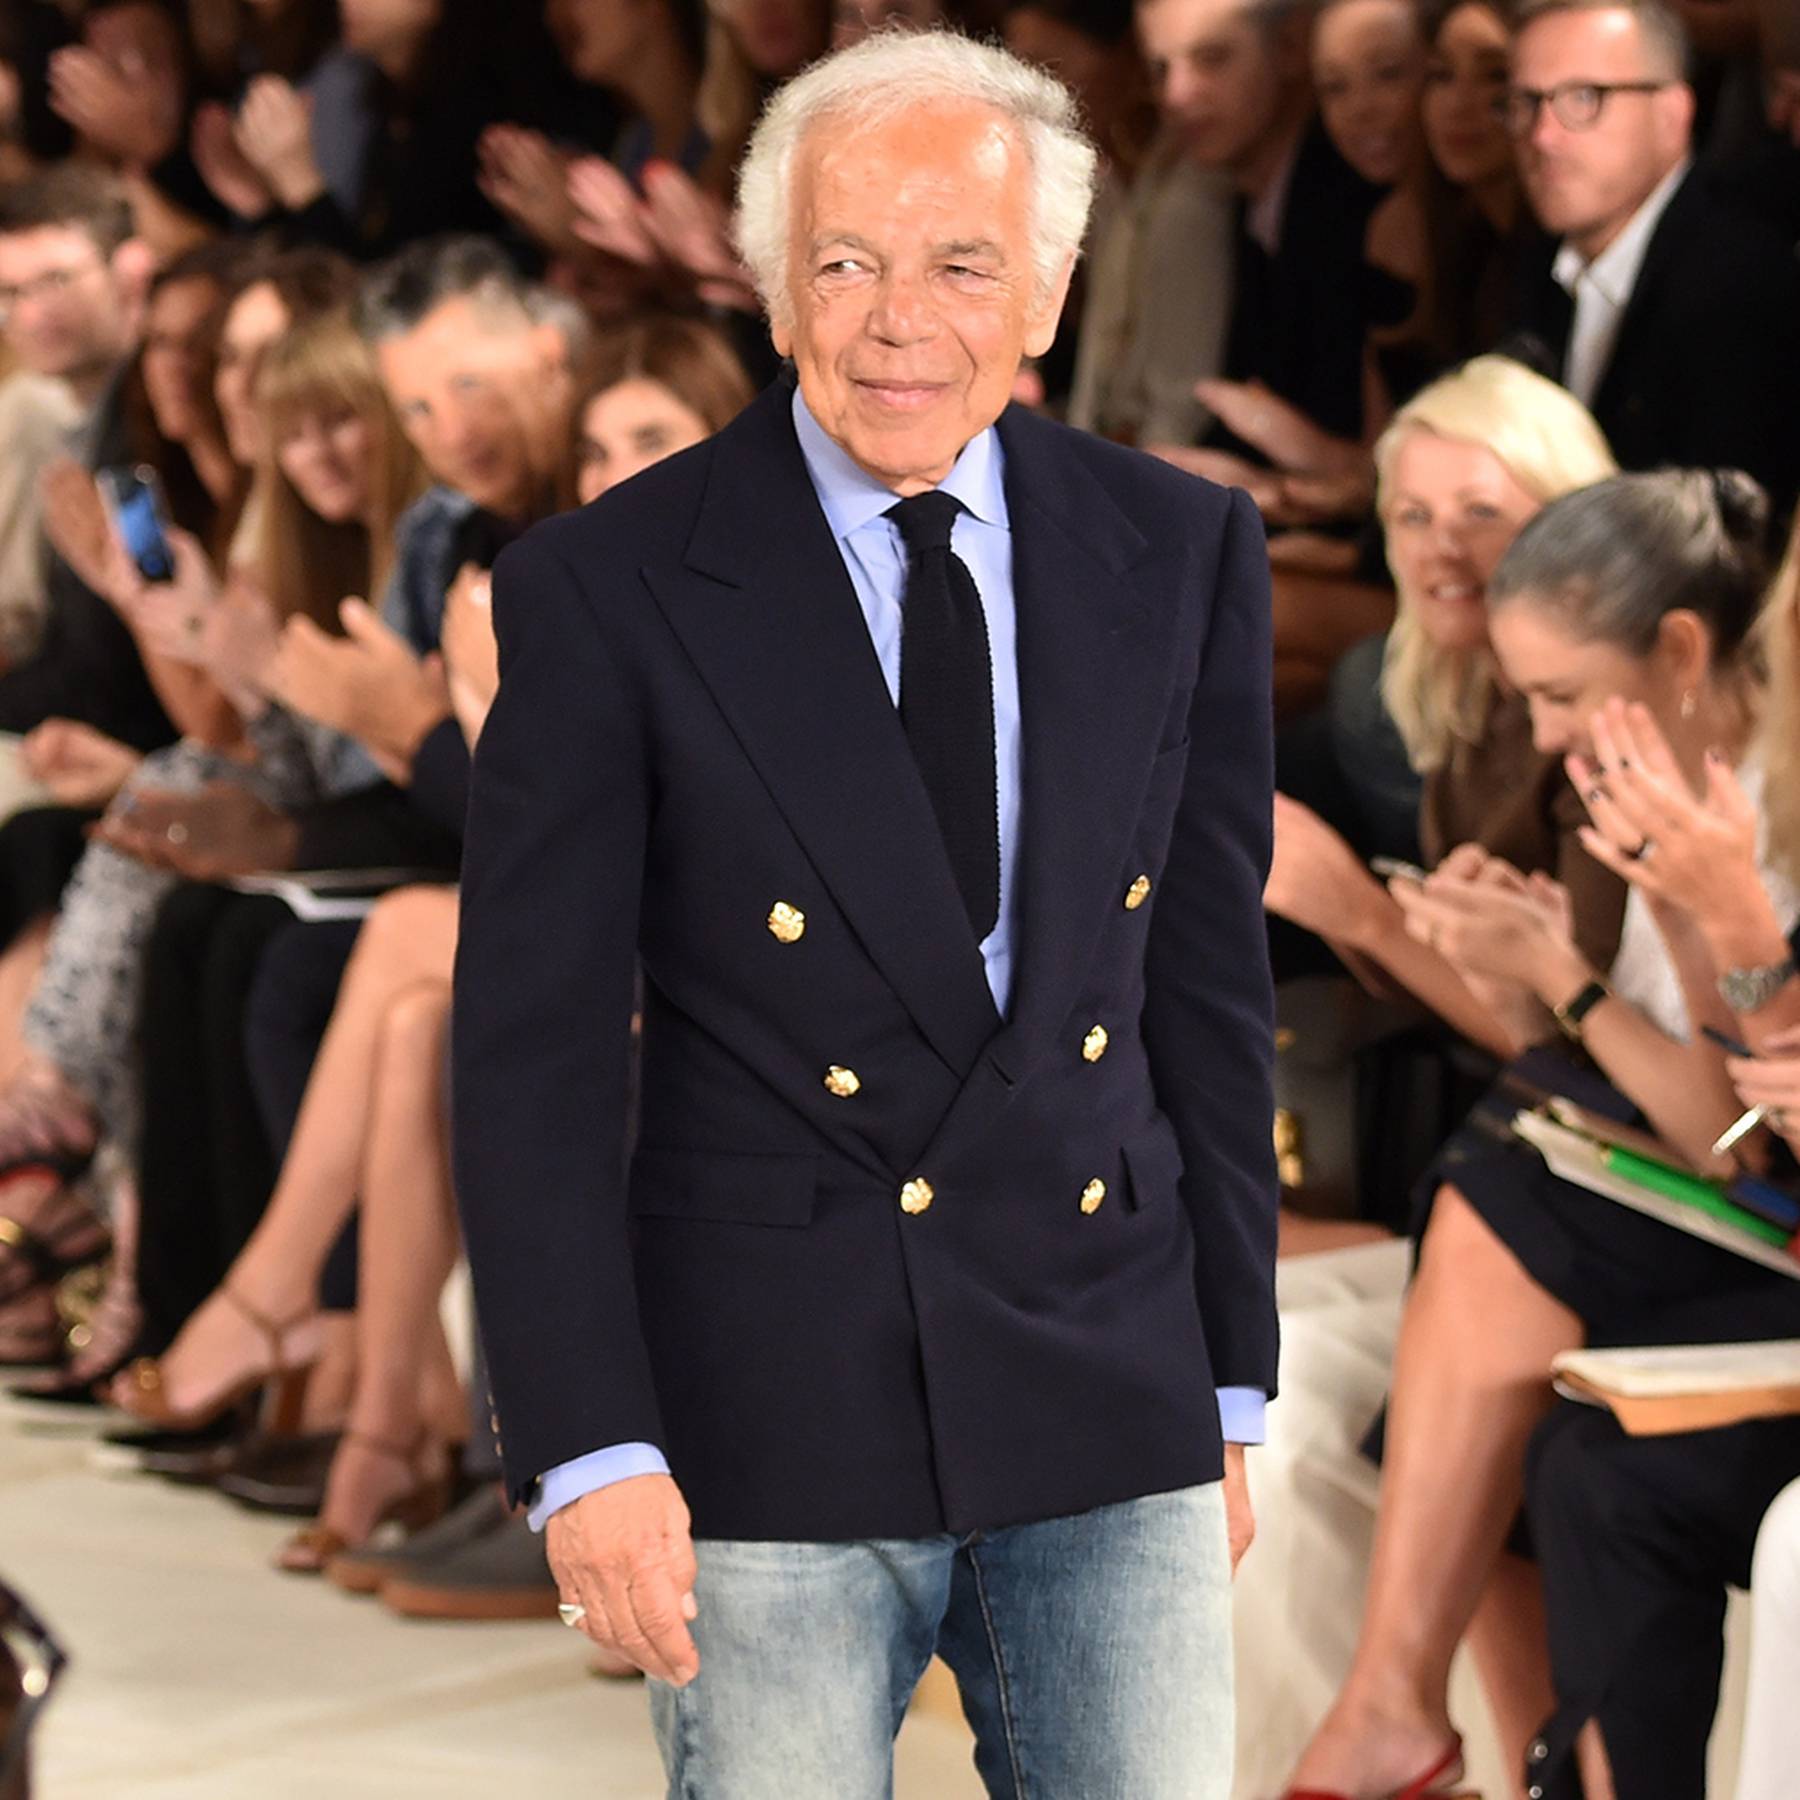 Ralph Lauren Is Pushing Higher Into Luxury With New Stores, Accessories -  WSJ